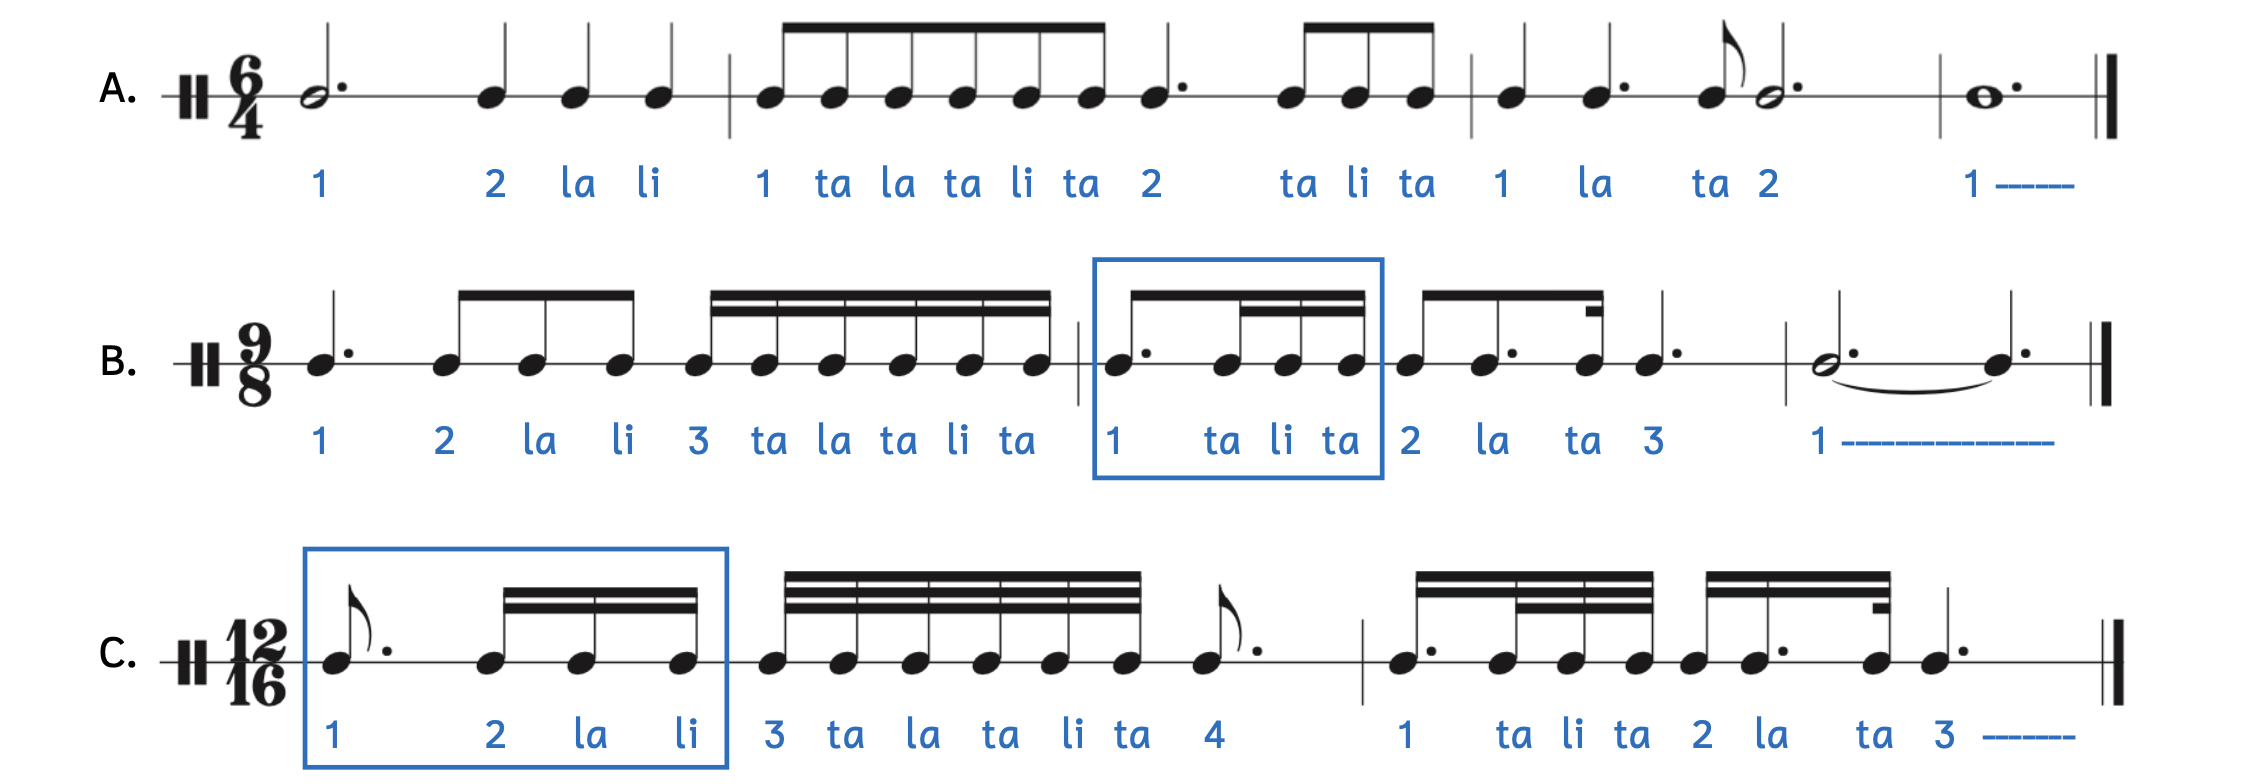 Sample rhythms in compound meters. Example A is in 6-4. Example B is in 9-8. Example C is in 12-16. Listen to sound example below.